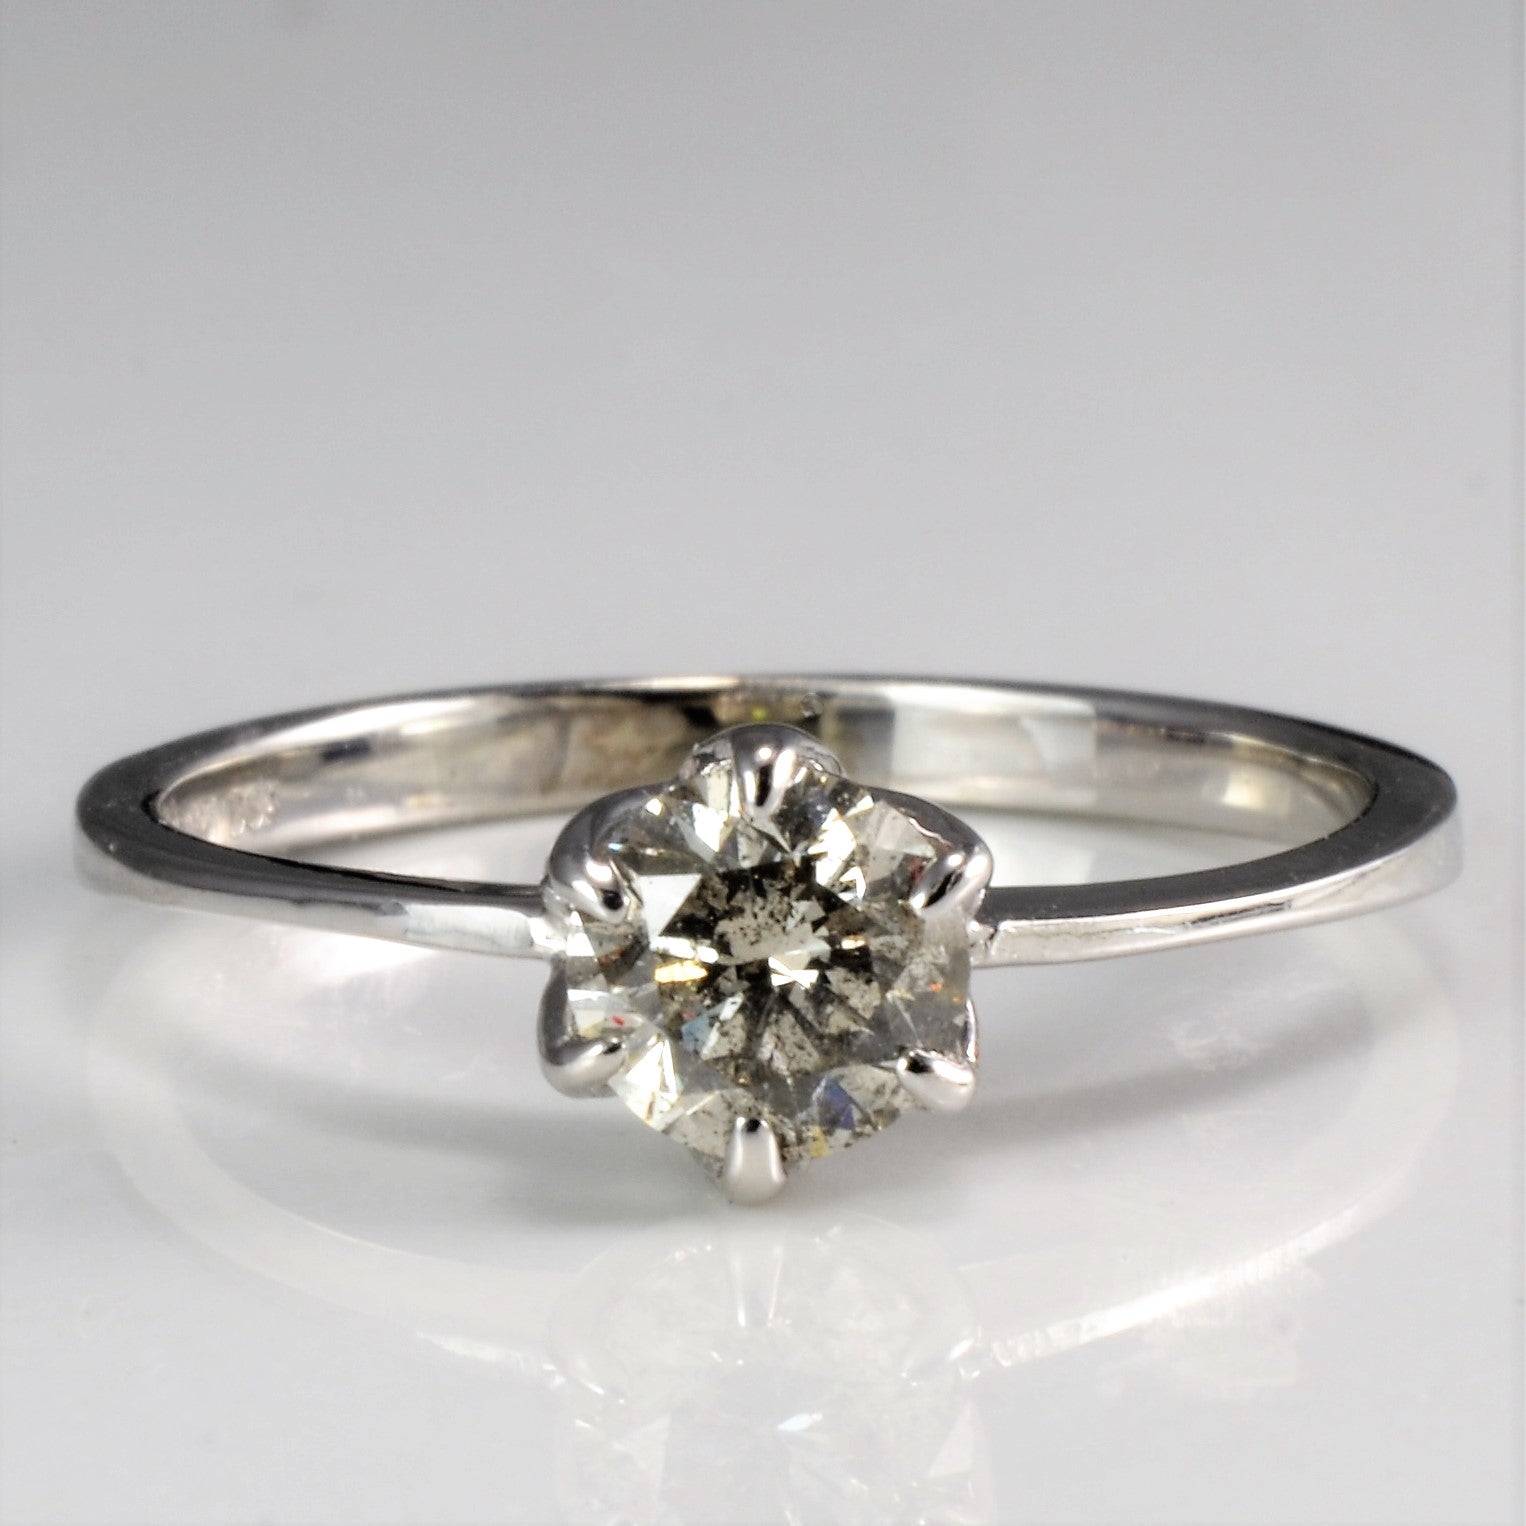 Six Prong Solitaire Diamond Ring | 0.53 ct, SZ 6.25 |